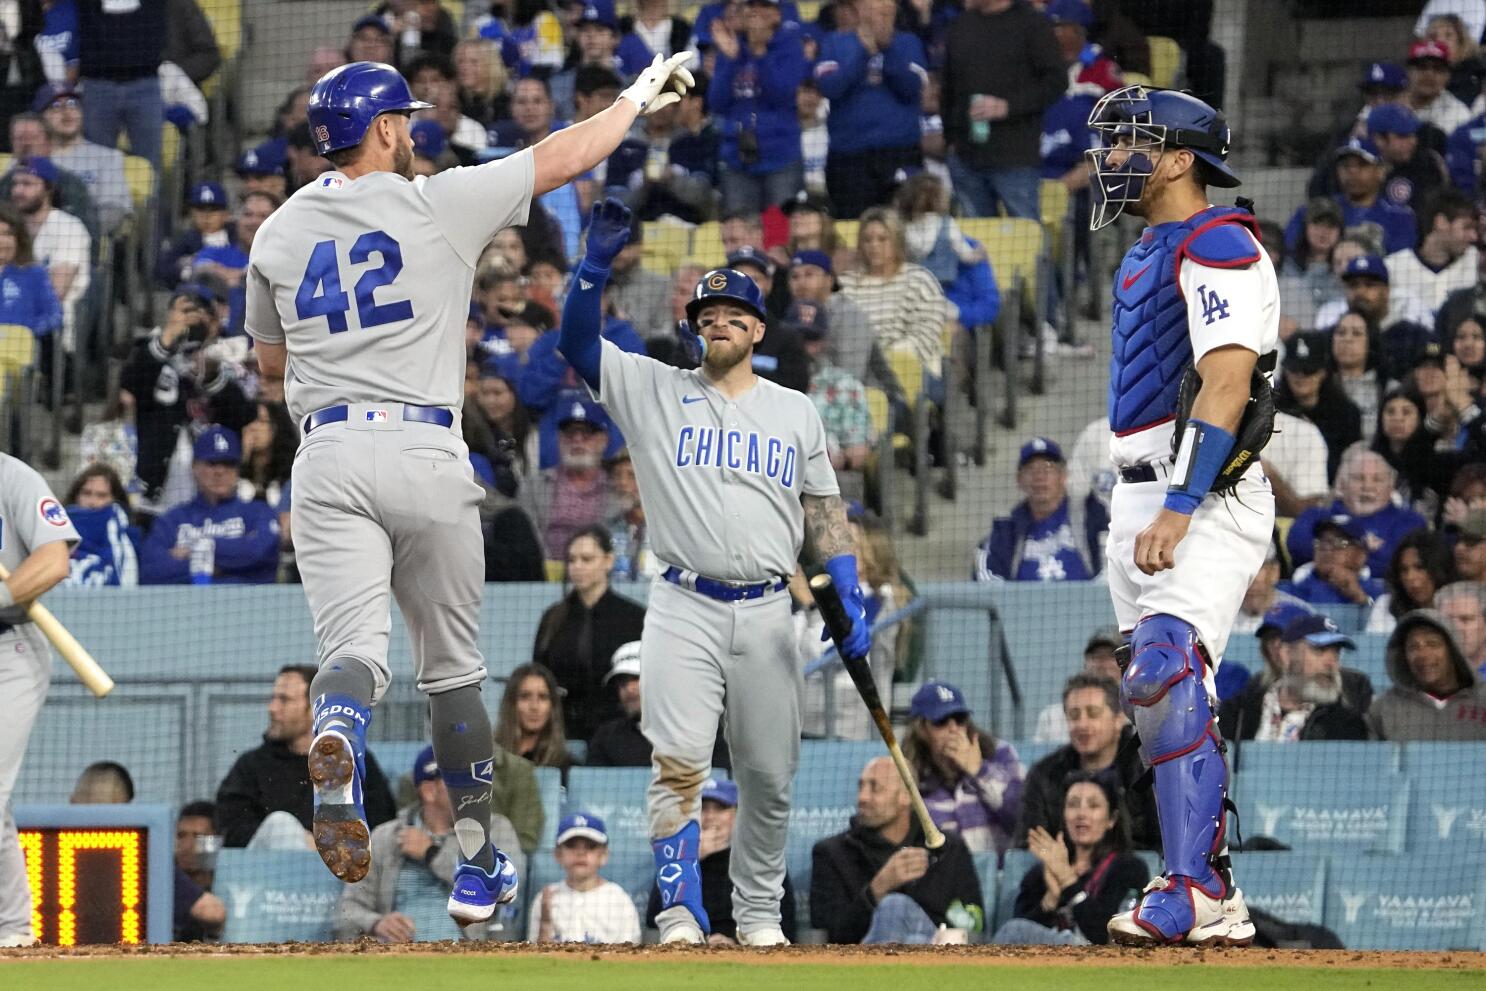 Dodgers vs Cubs Highlights, WALK-OFF ON JACKIE ROBINSON DAY